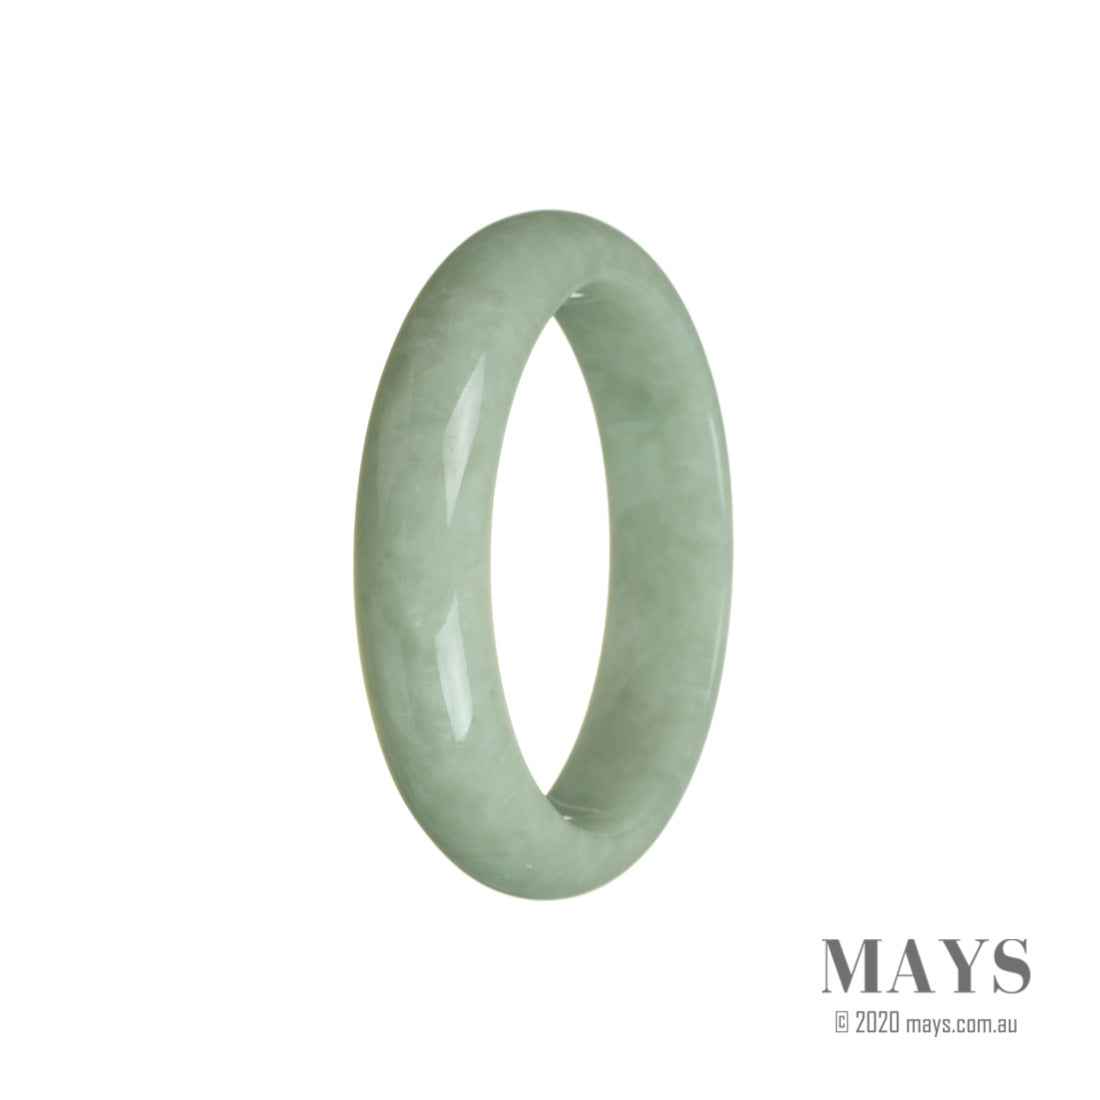 A half moon-shaped green Burmese jade bangle bracelet with authentic and natural characteristics, handcrafted by Mays Gems.